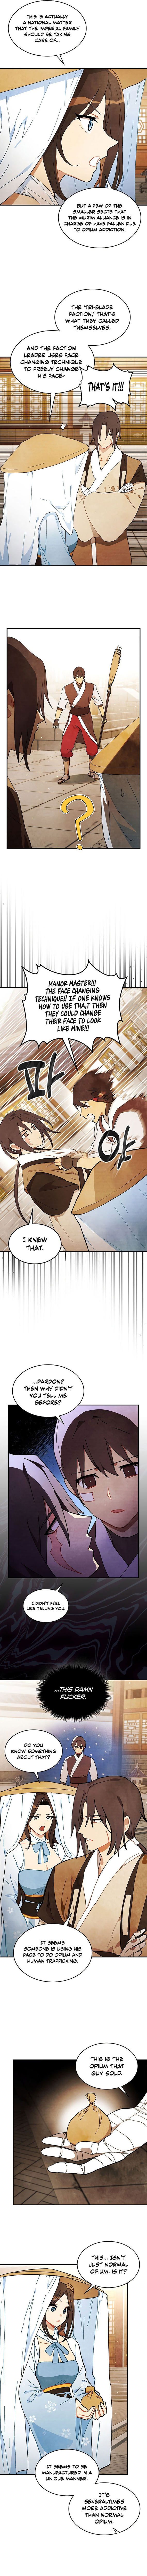 chronicles-of-the-martial-gods-return-chap-32-3